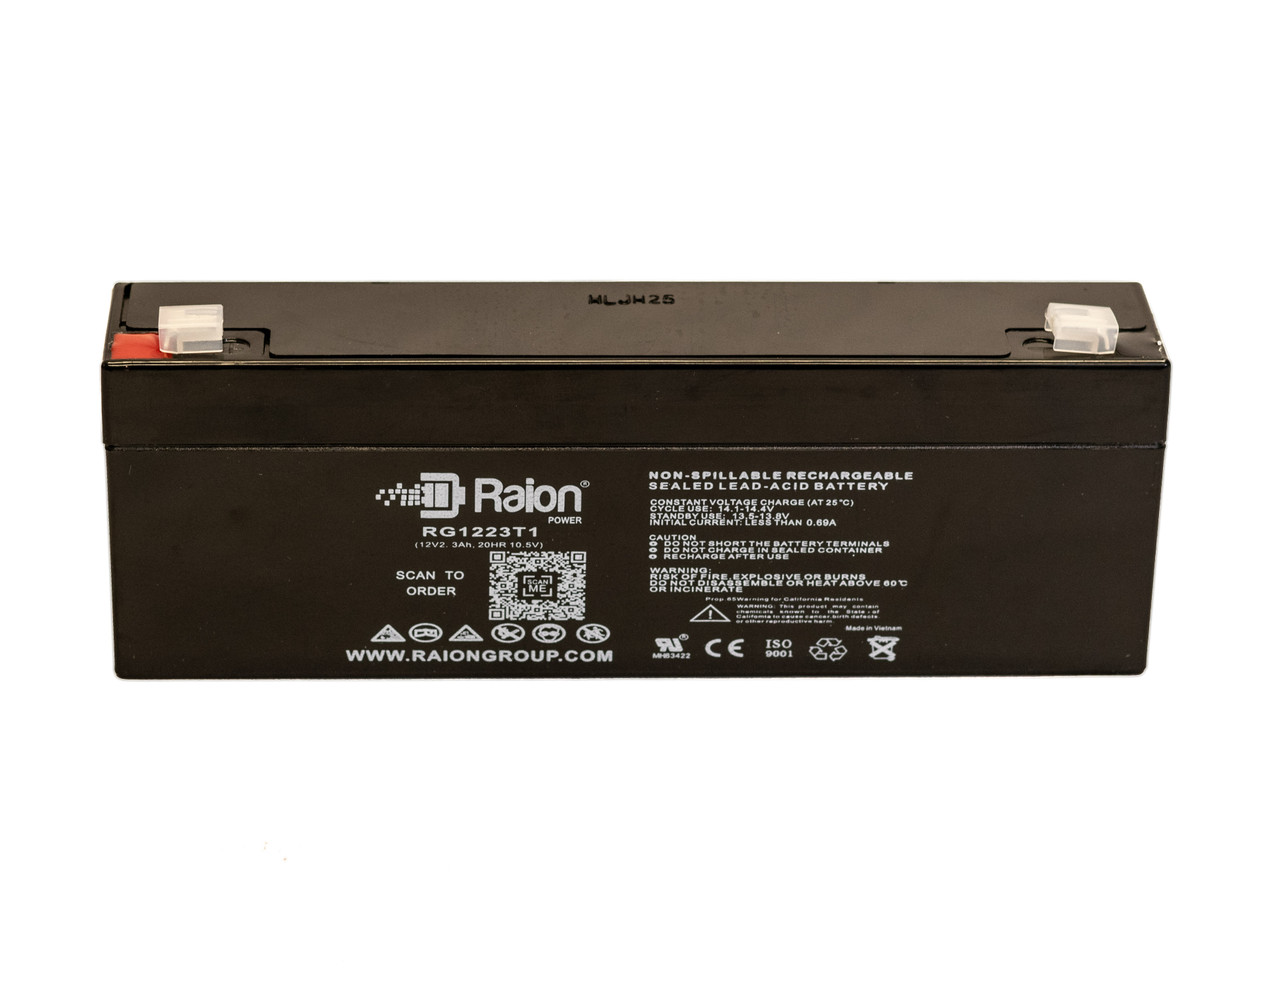 Raion Power 12V 2.3Ah SLA Battery With T1 Terminals For Narco Air Shields N10 Warm Weigh Infant Scale